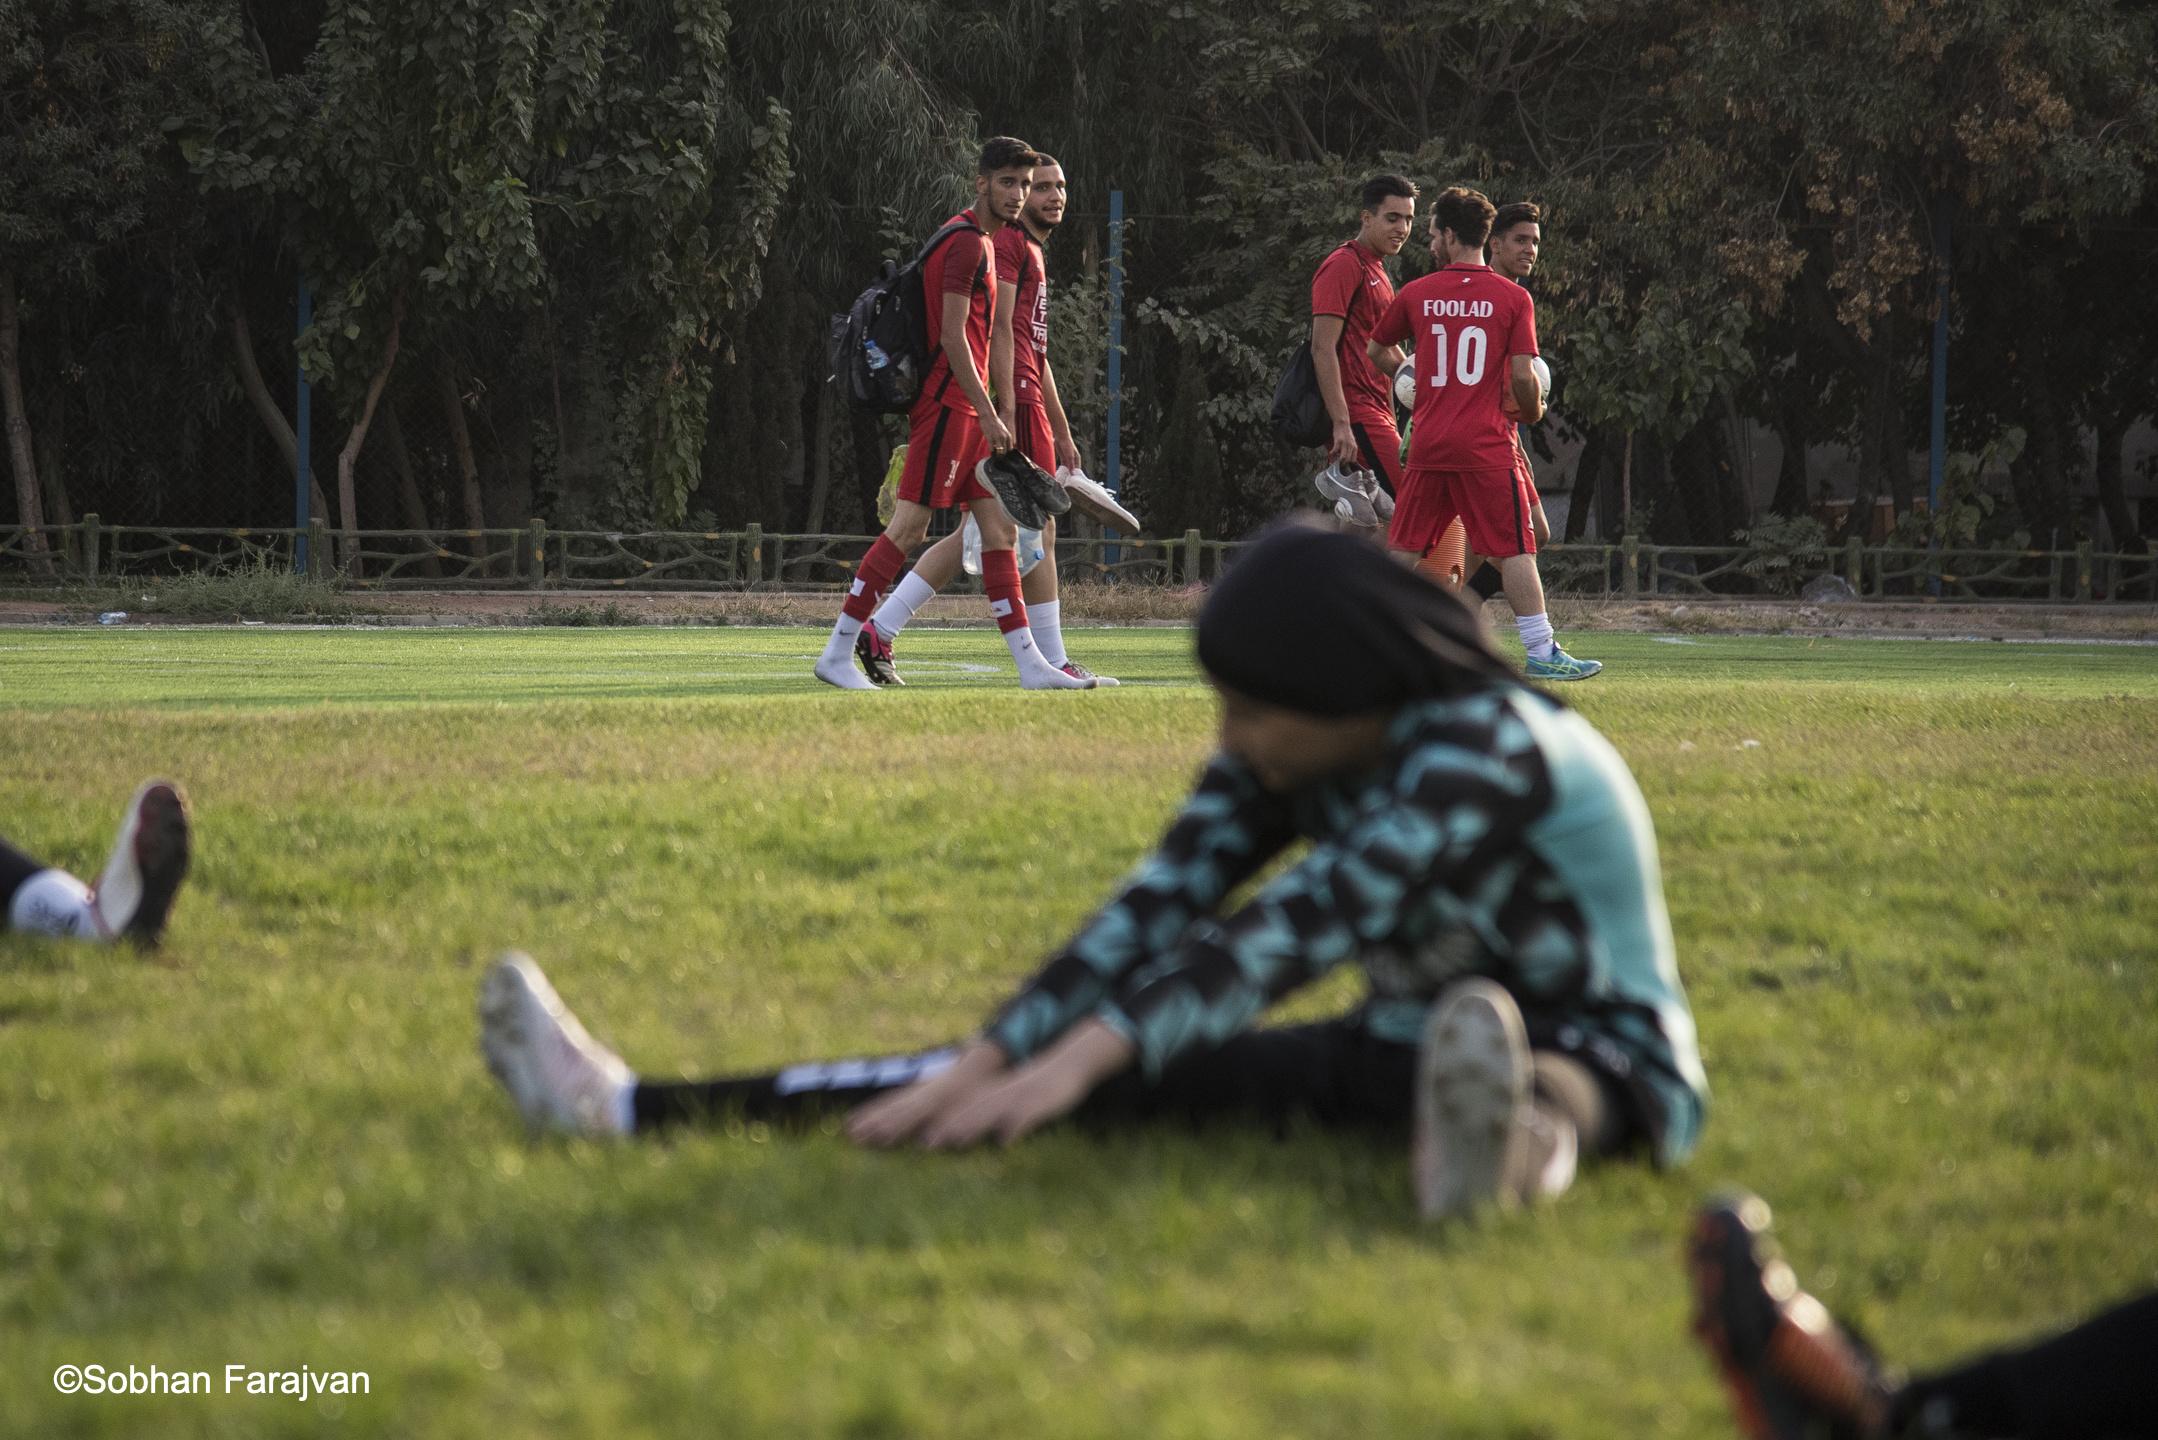 Iranian women's soccer academy (2022) - A group of boy players looks at girl player on the soccer...